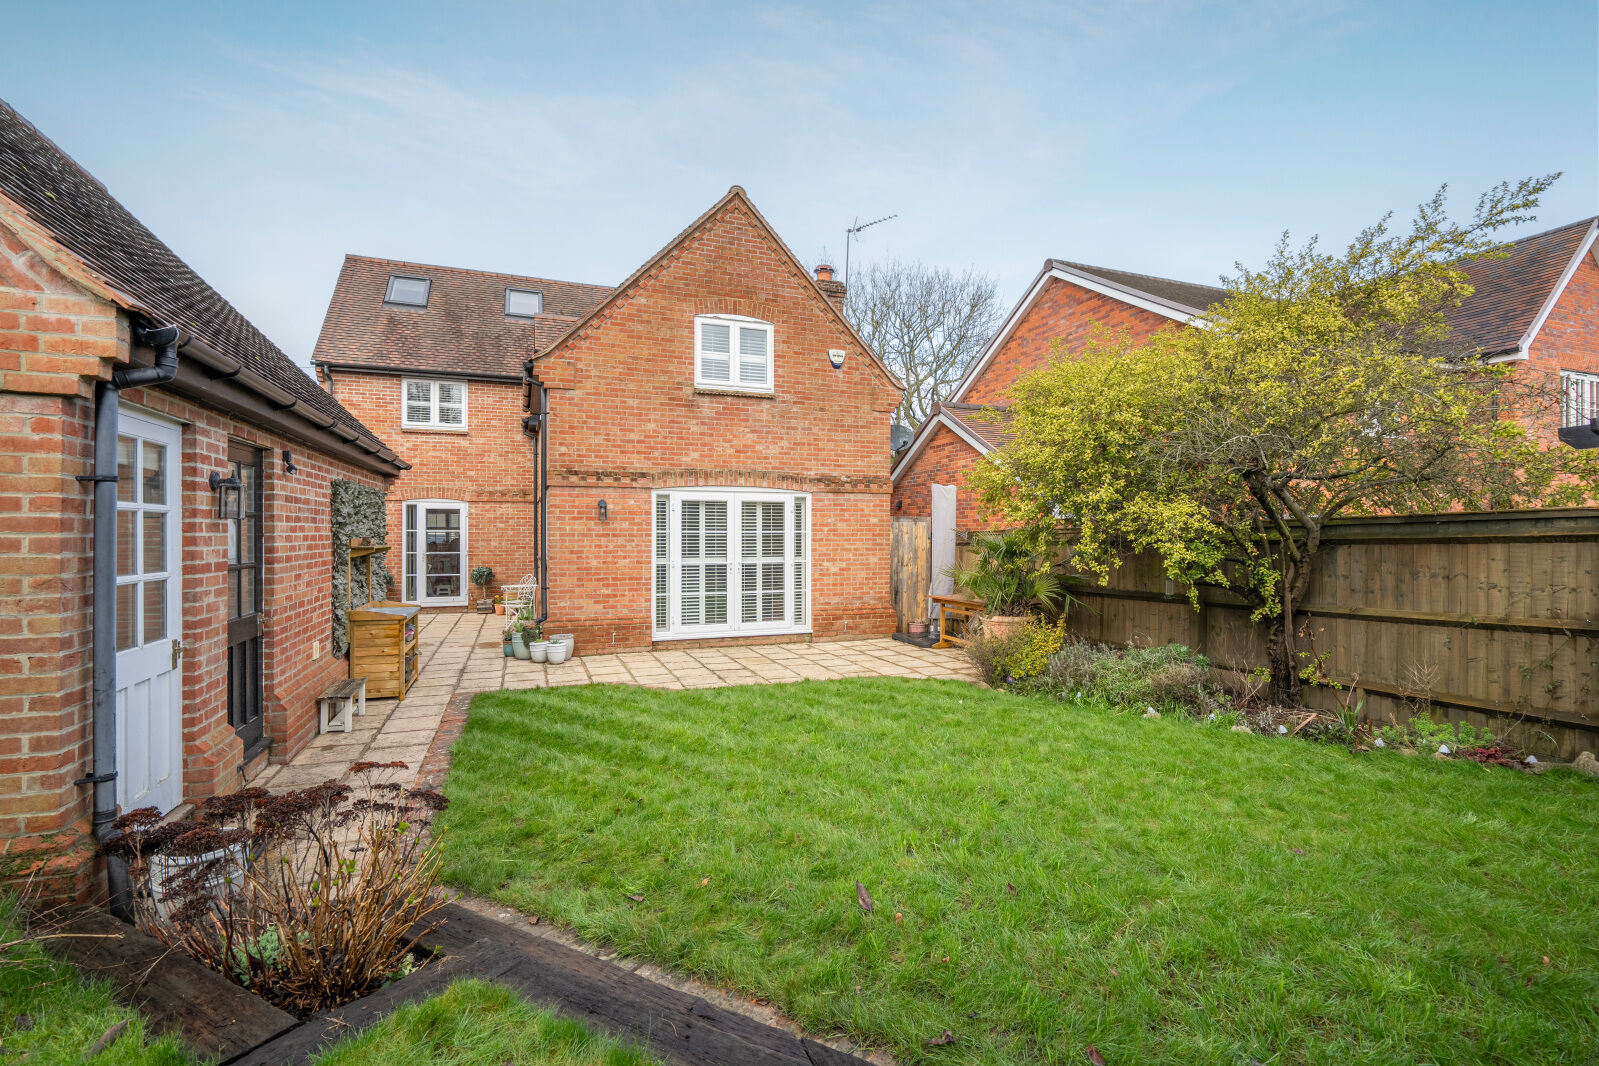 5 bedroom detached house for sale Clappins Lane, Naphill, HP14, main image